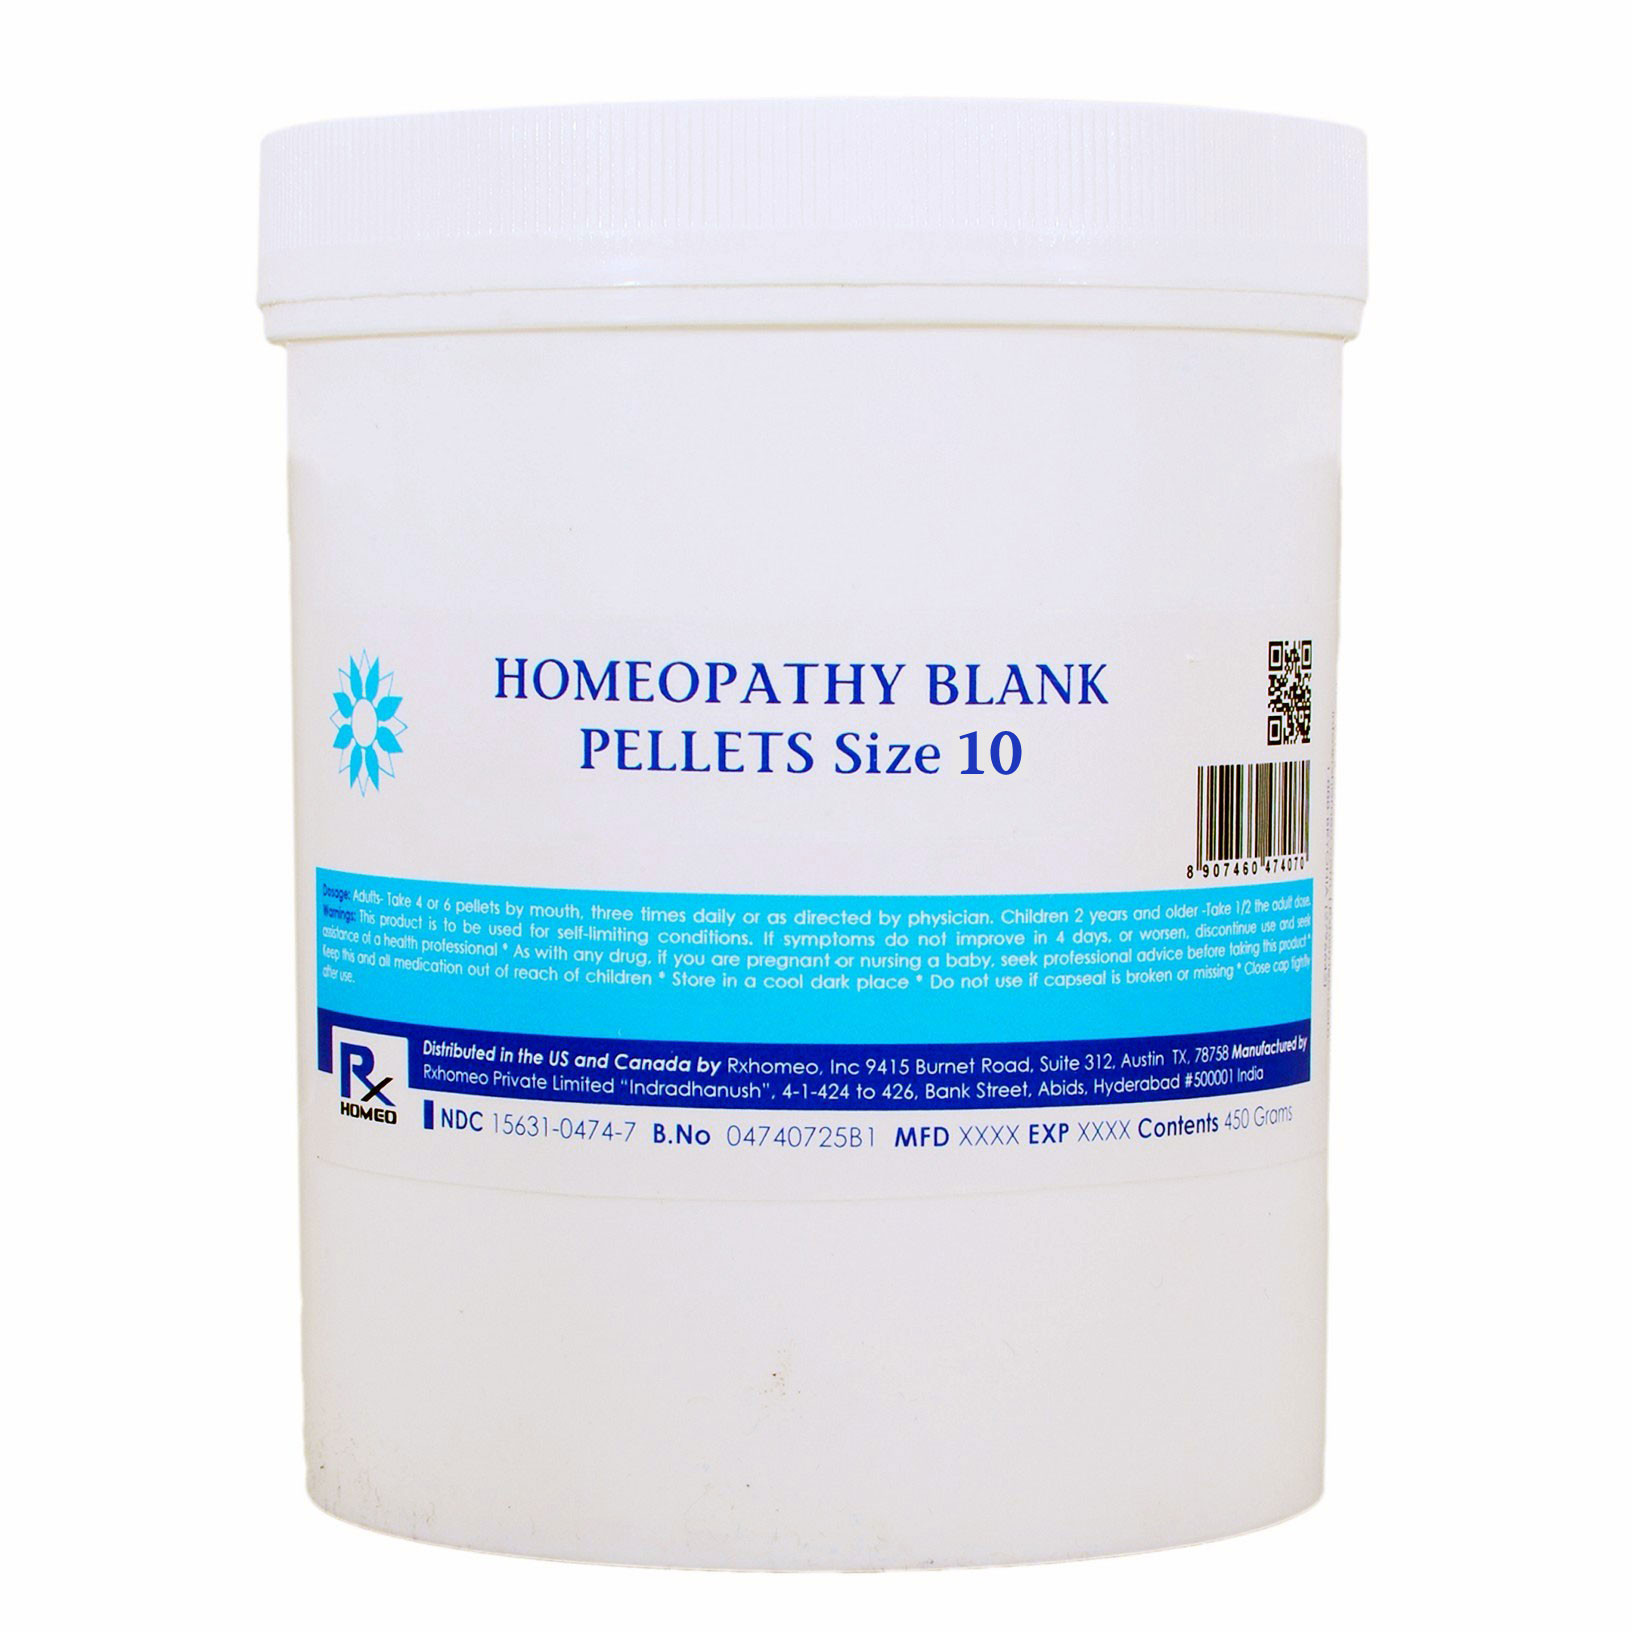 RXHOMEO HOMEOPATHY BLANK PELLETS SIZE 10